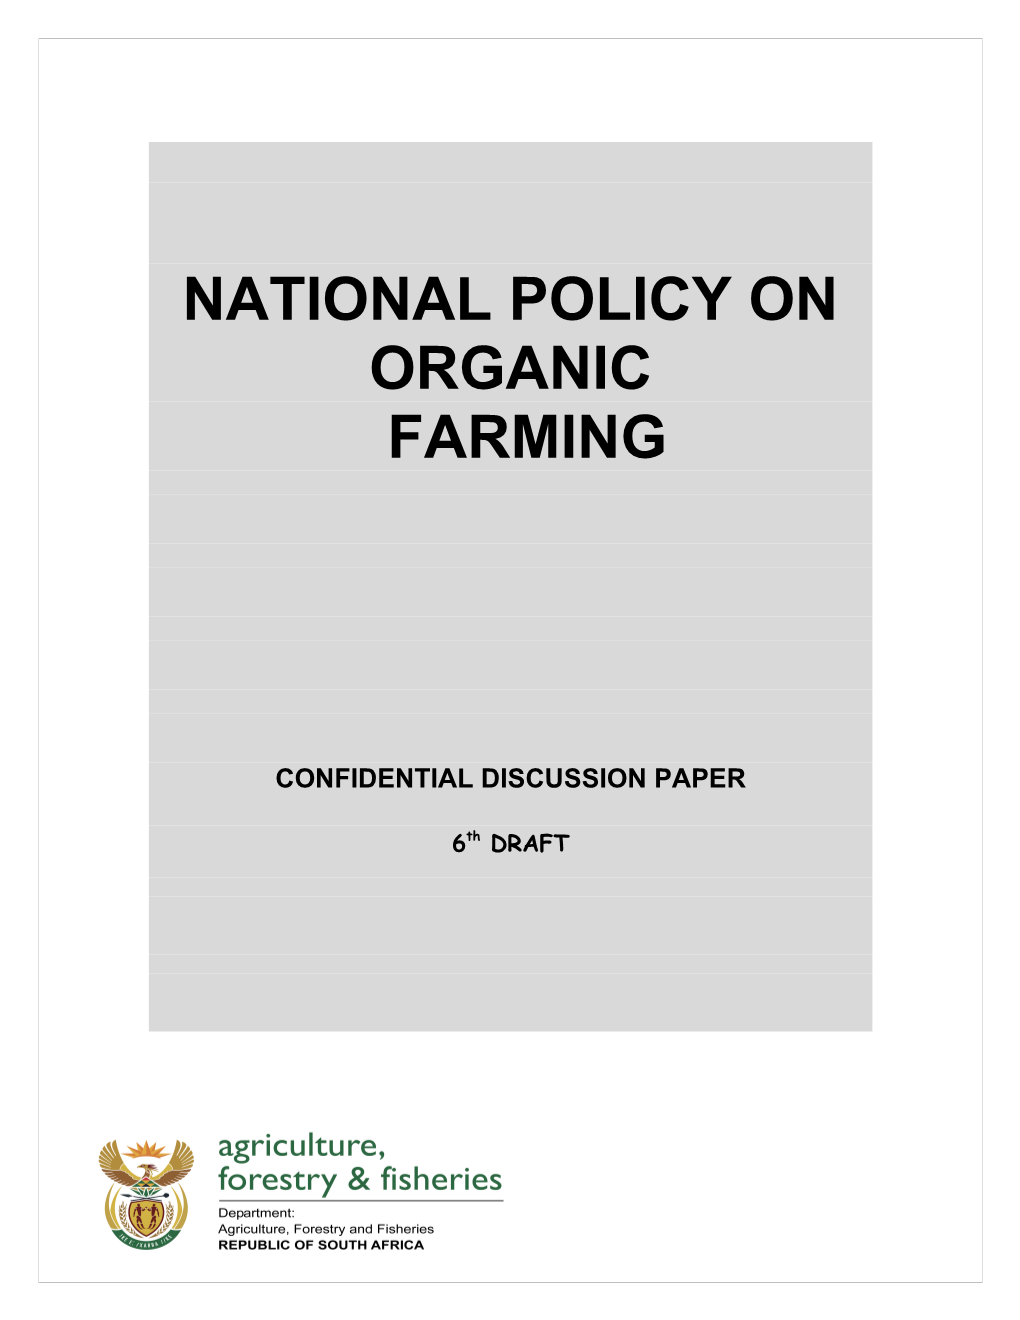 National Policy on Organic